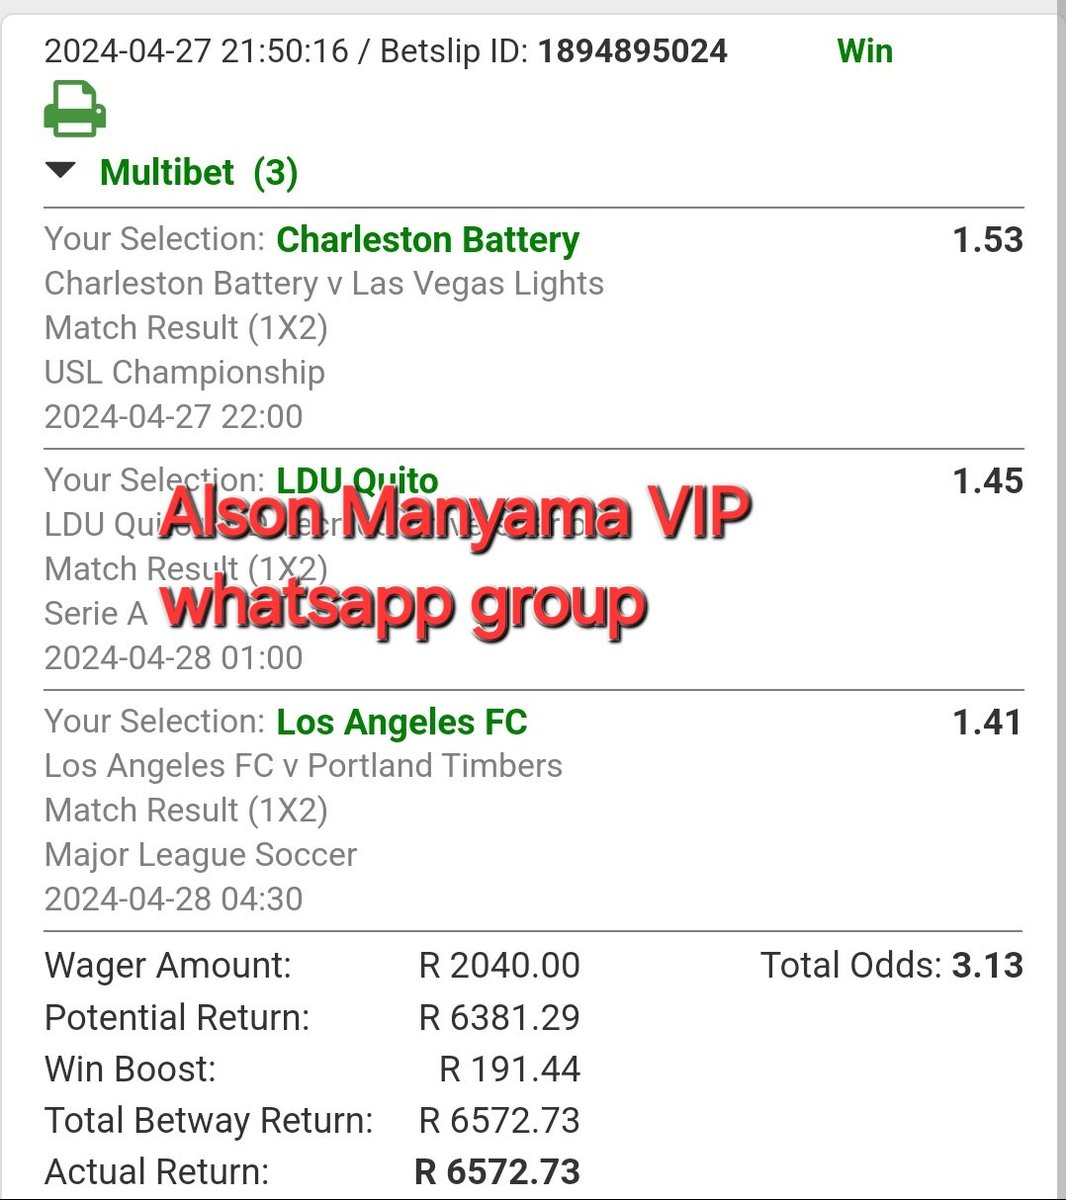 BOOOOOOOM 💥 💥 💥 💥 💥 💥 💥 💥 💥 They ate Betway Win R6 572.73 We go again today in the group with 2 train bonus slips to win each member more than R1m. Let's get it 💥 💥 💥 💥 Joining is not by force ... is by choice.